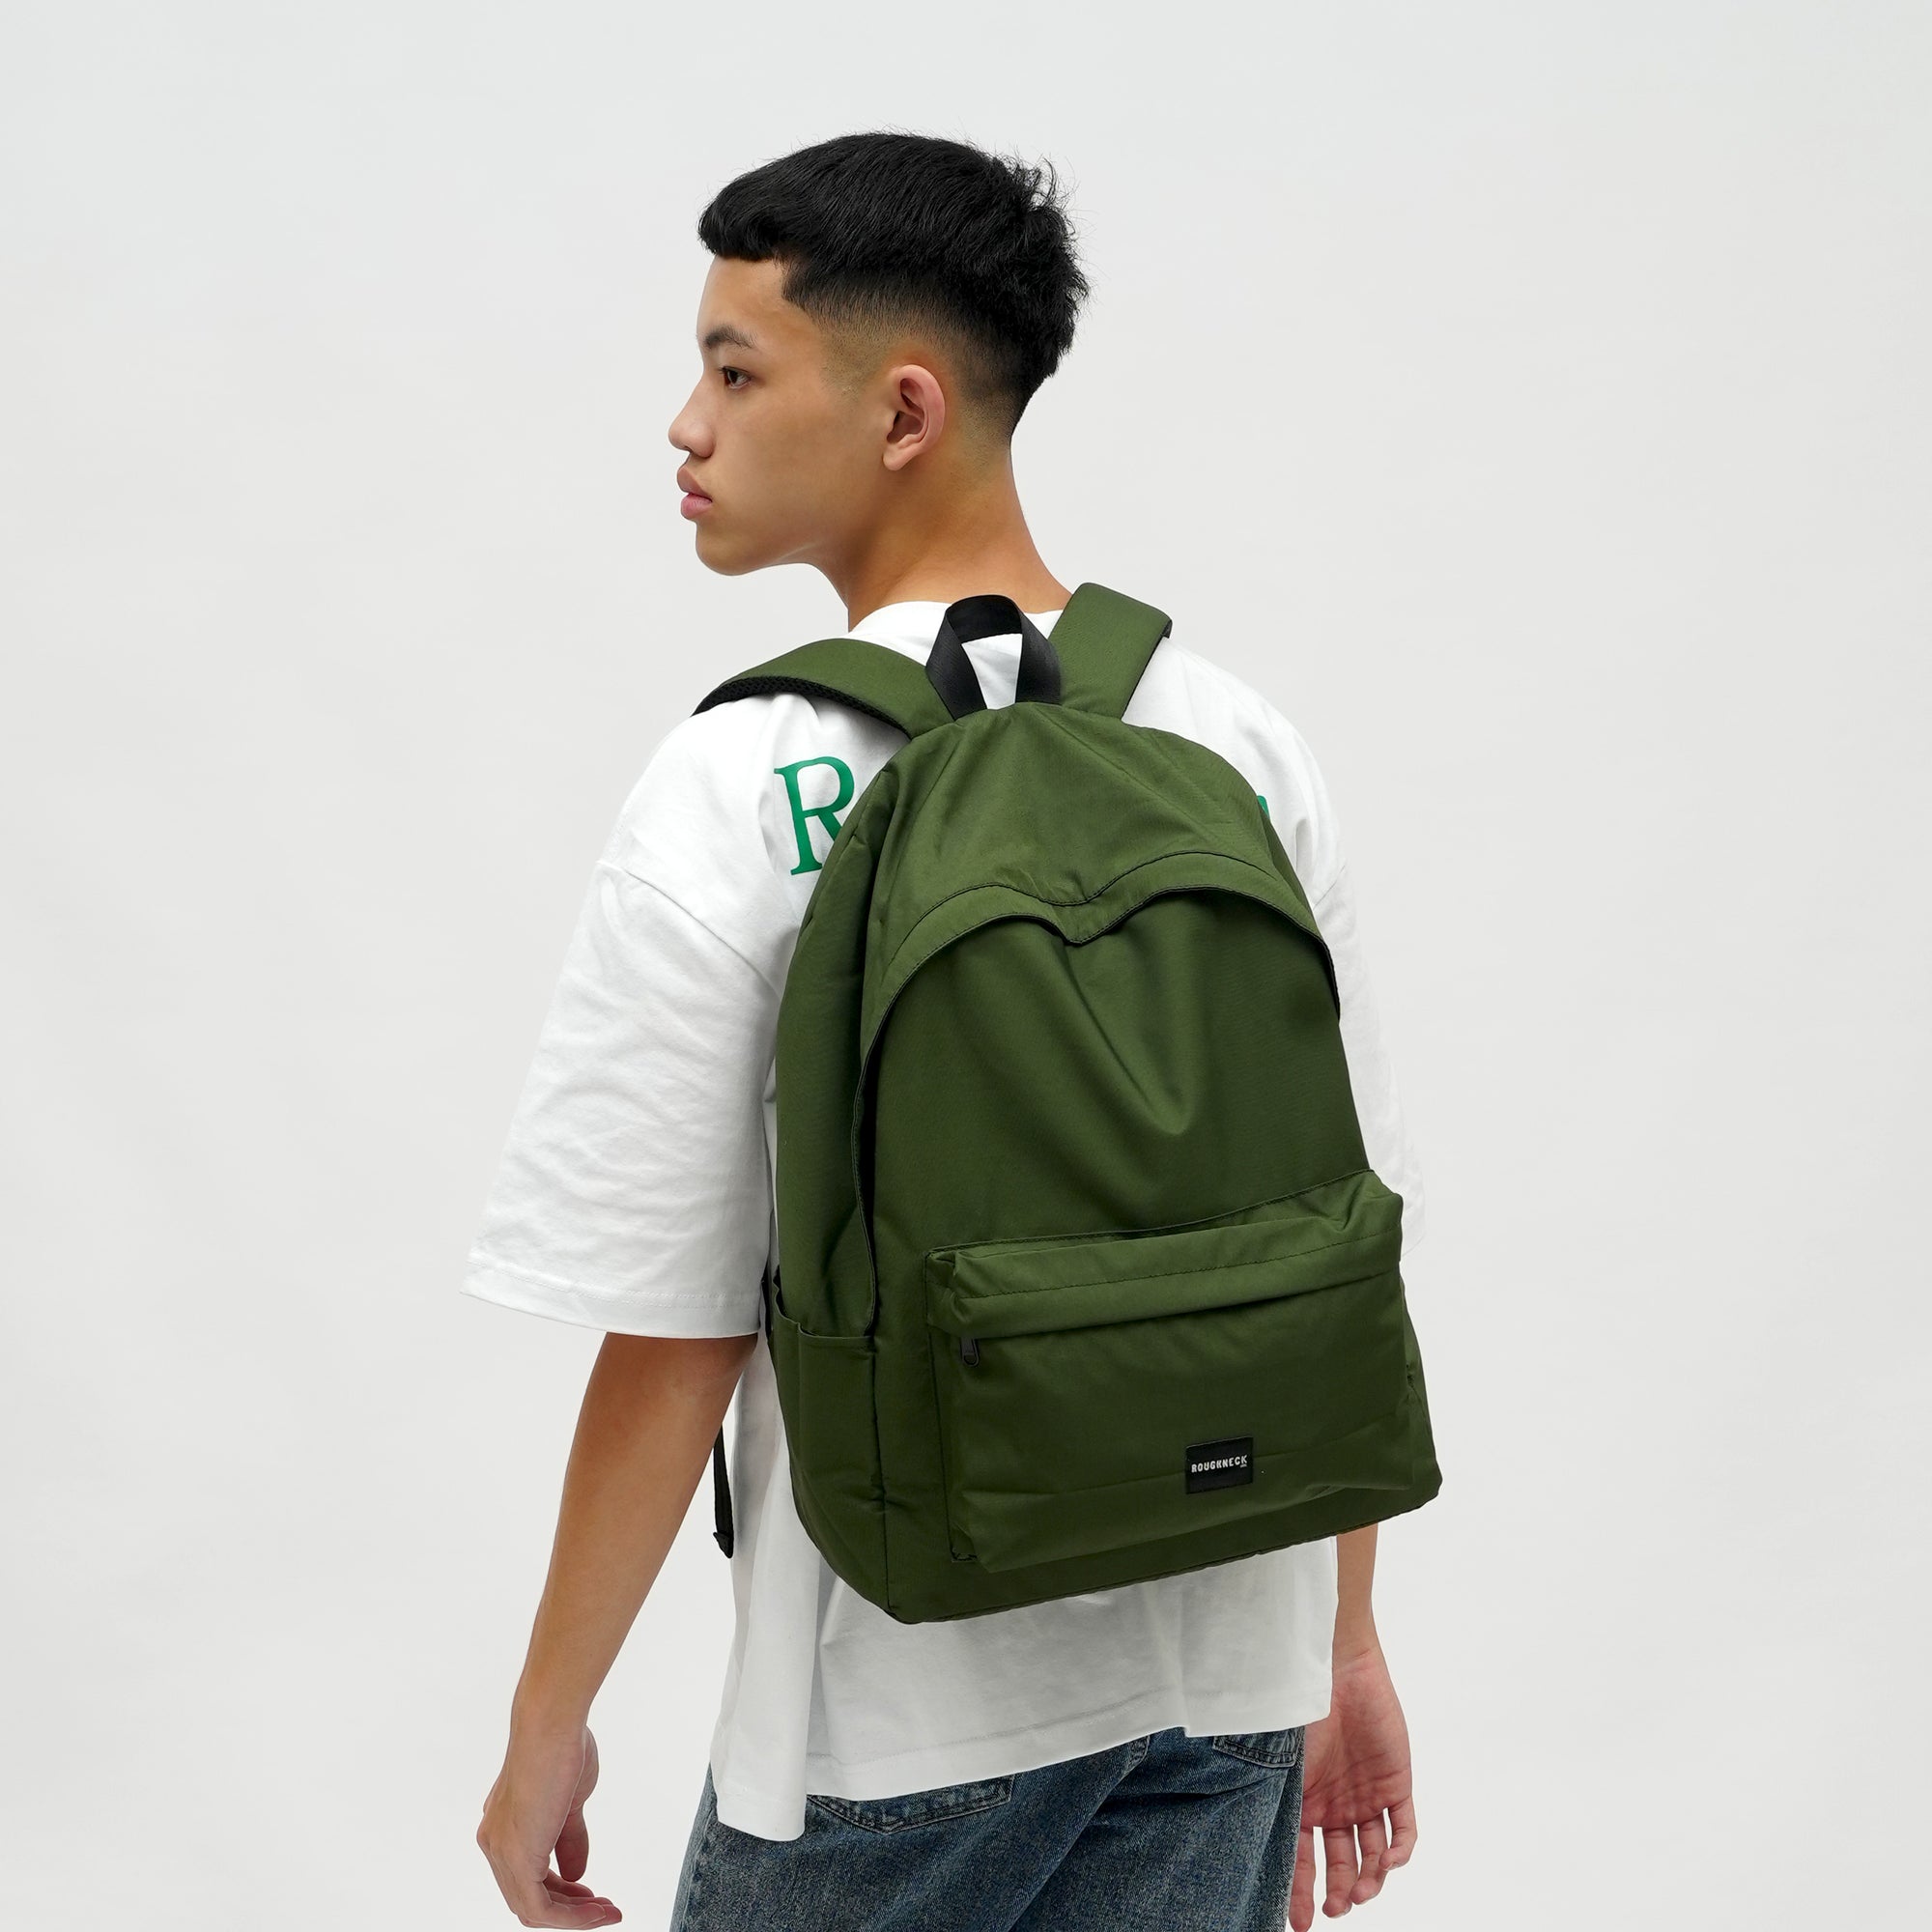 Roughneck BP019 Army Green Easter Island Backpack